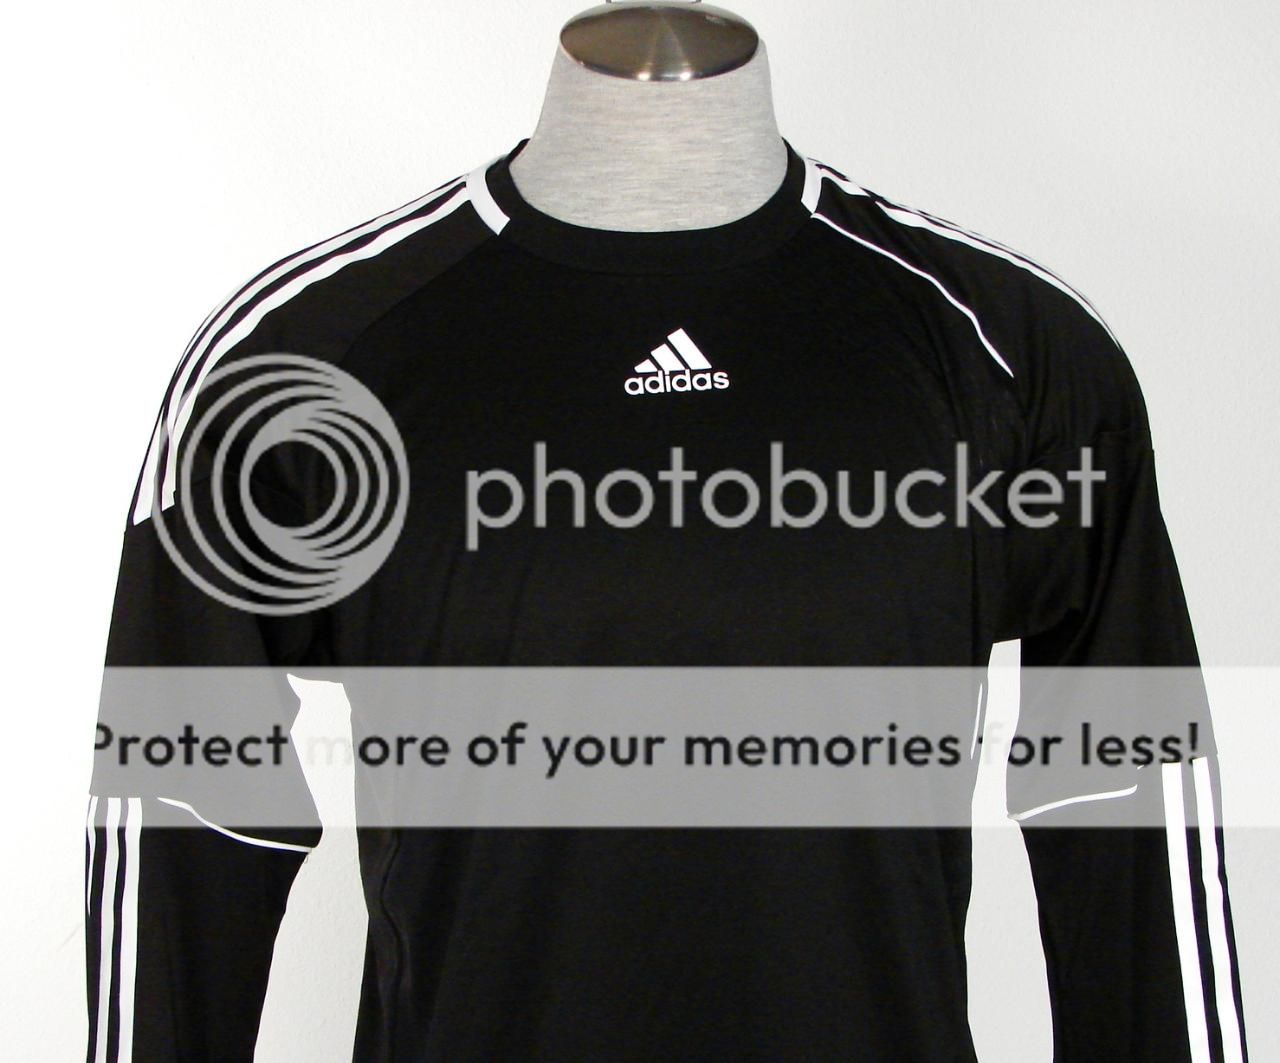   Formotion ClimaCool Black Goal Keeper Football Soccer Jersey Mens NWT